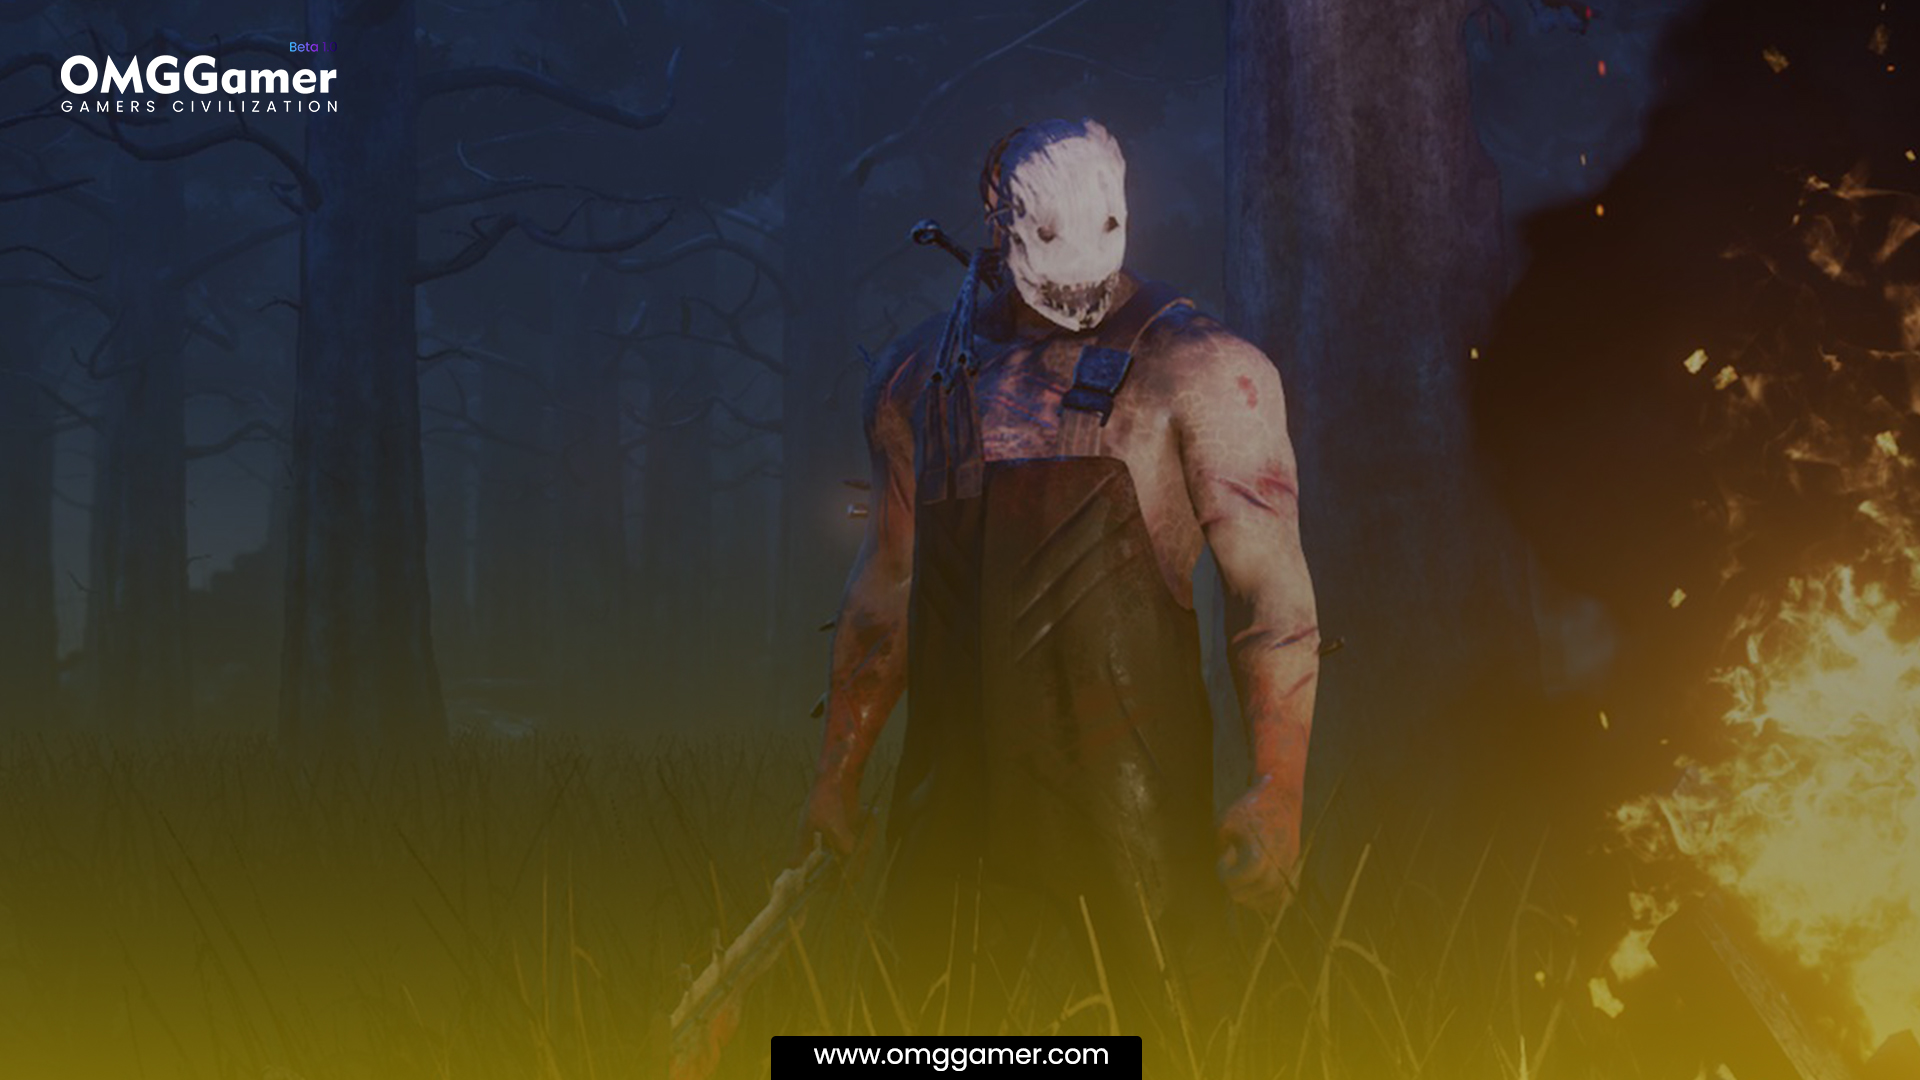 Is Dead By Daylight Cross Platform between PC and VR